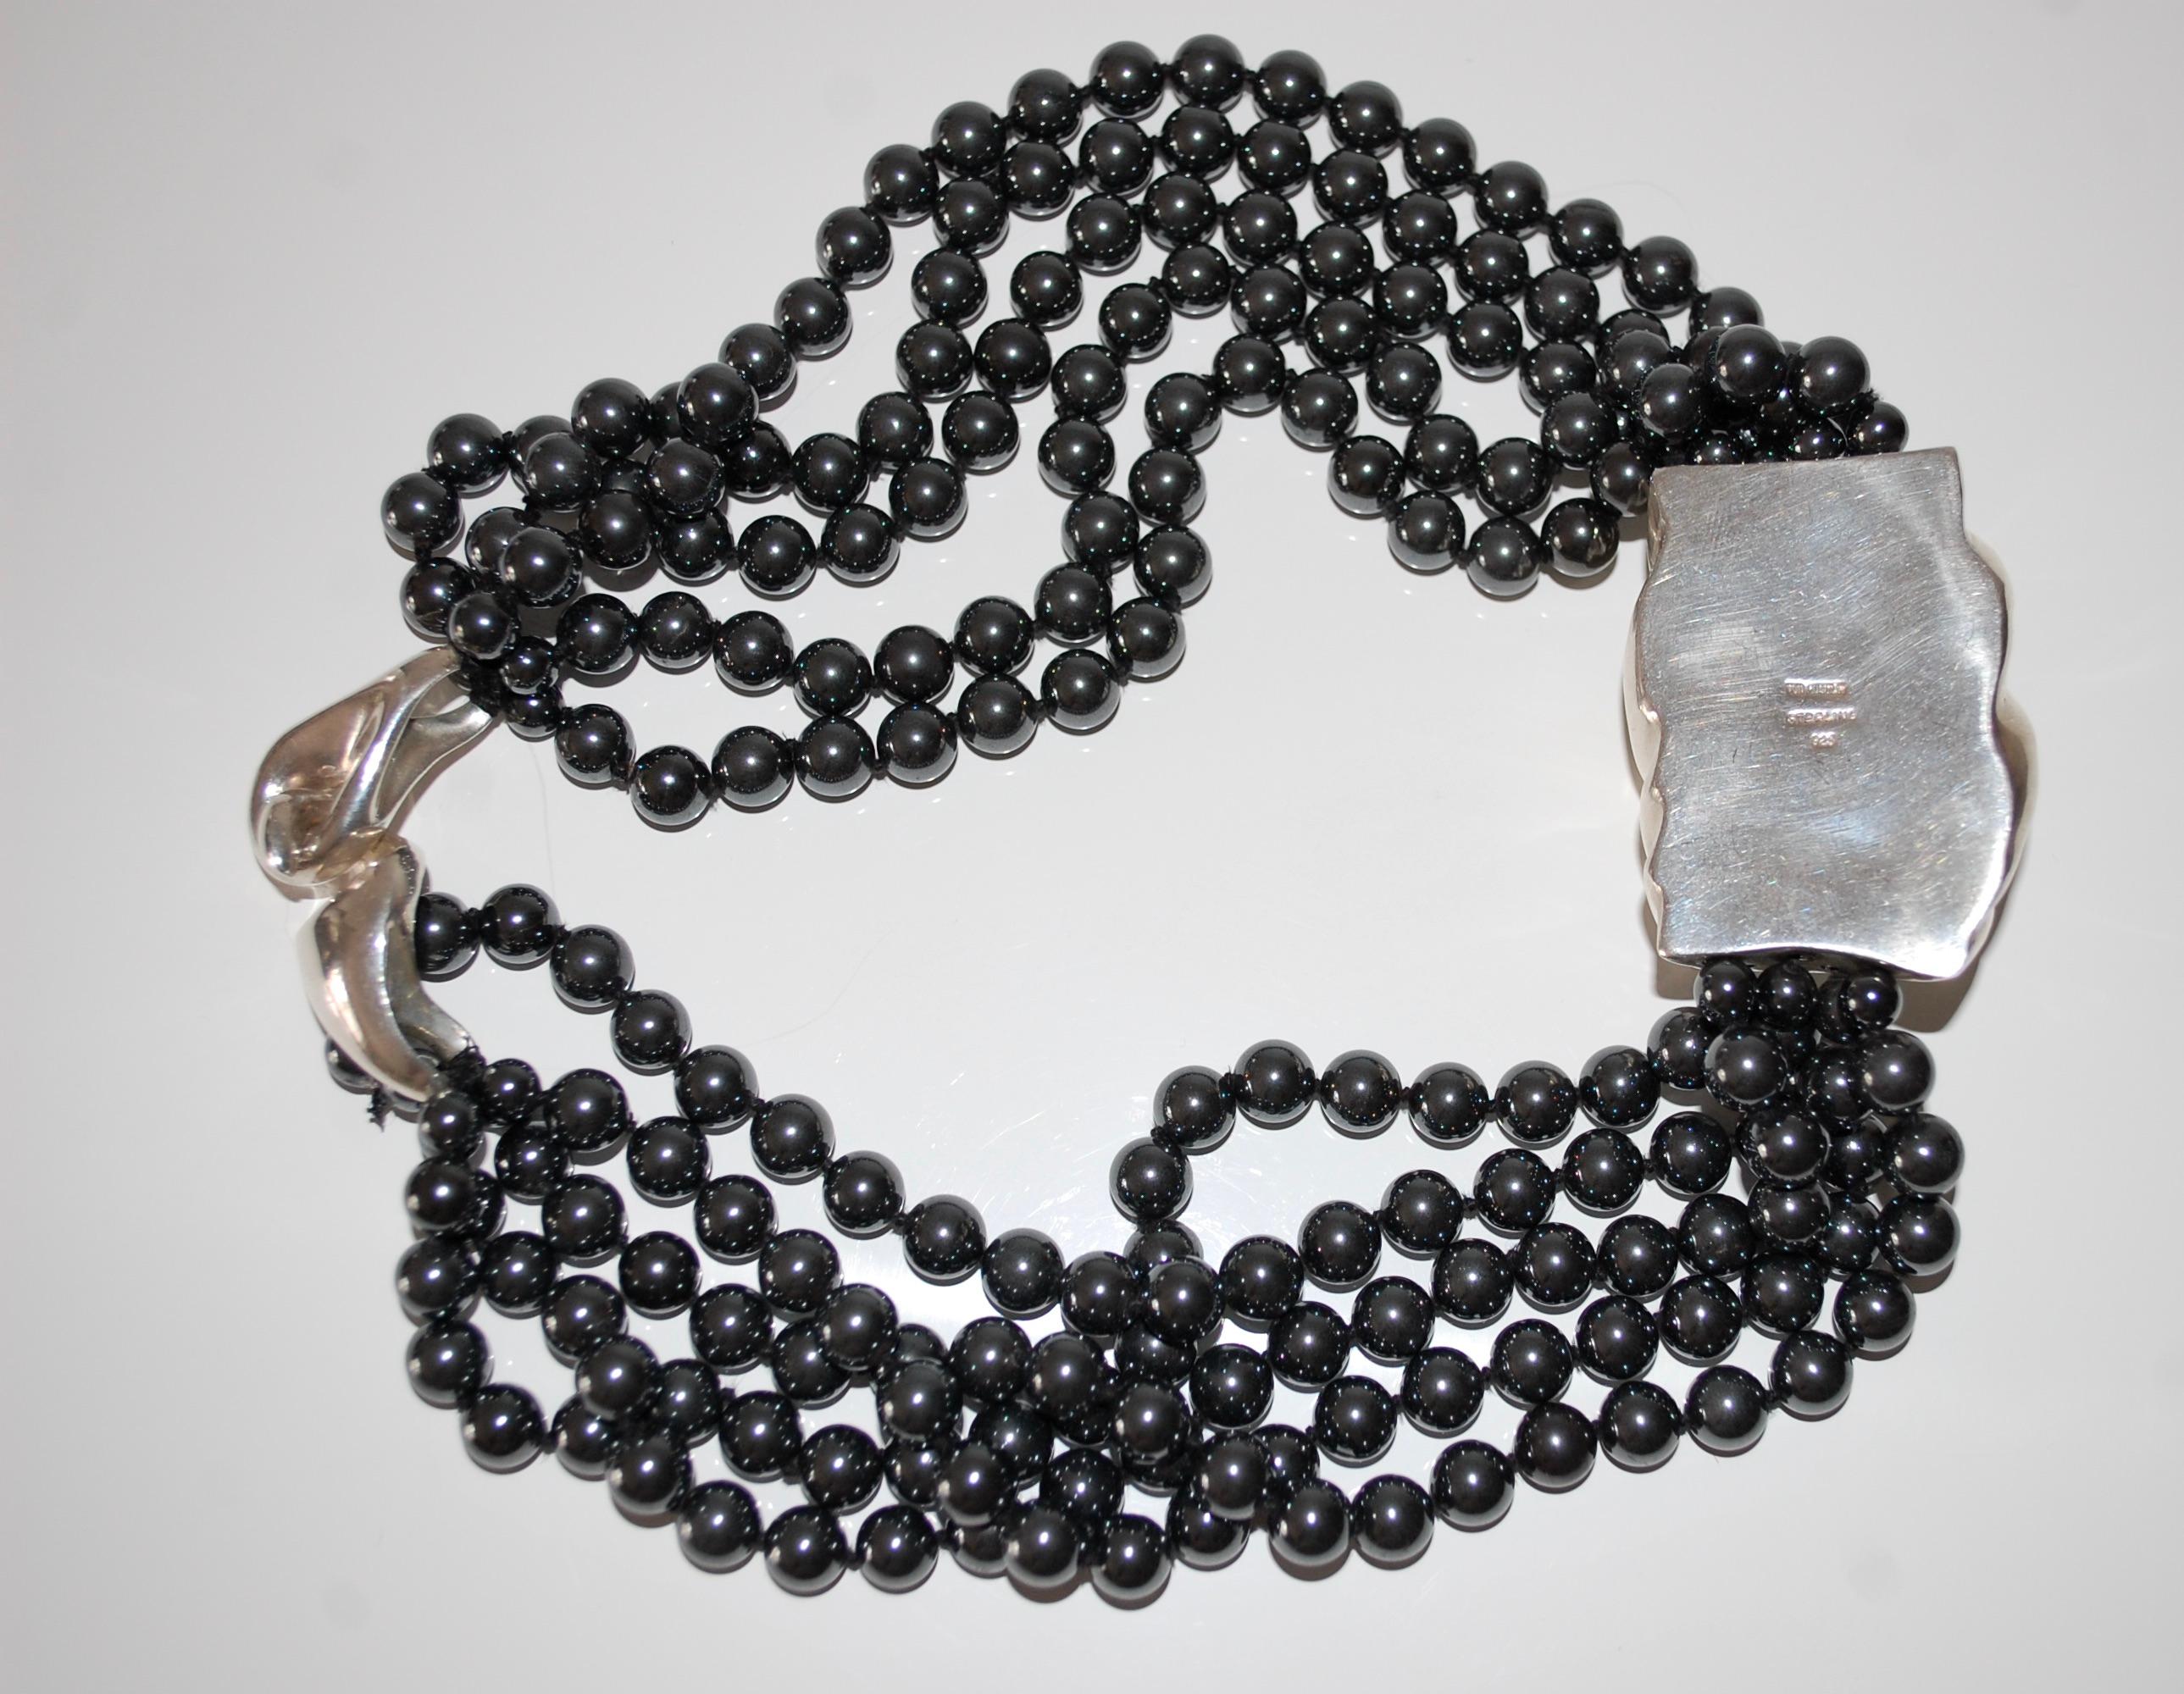 Patricia von Musulin
Hematite and sterling silver torsade necklace.
Designed with five strands of graduated round hematite beads size about 7 mm and elegant sculpted sterling silver pendant in the center.  
Signed von Musulin
about 19.5